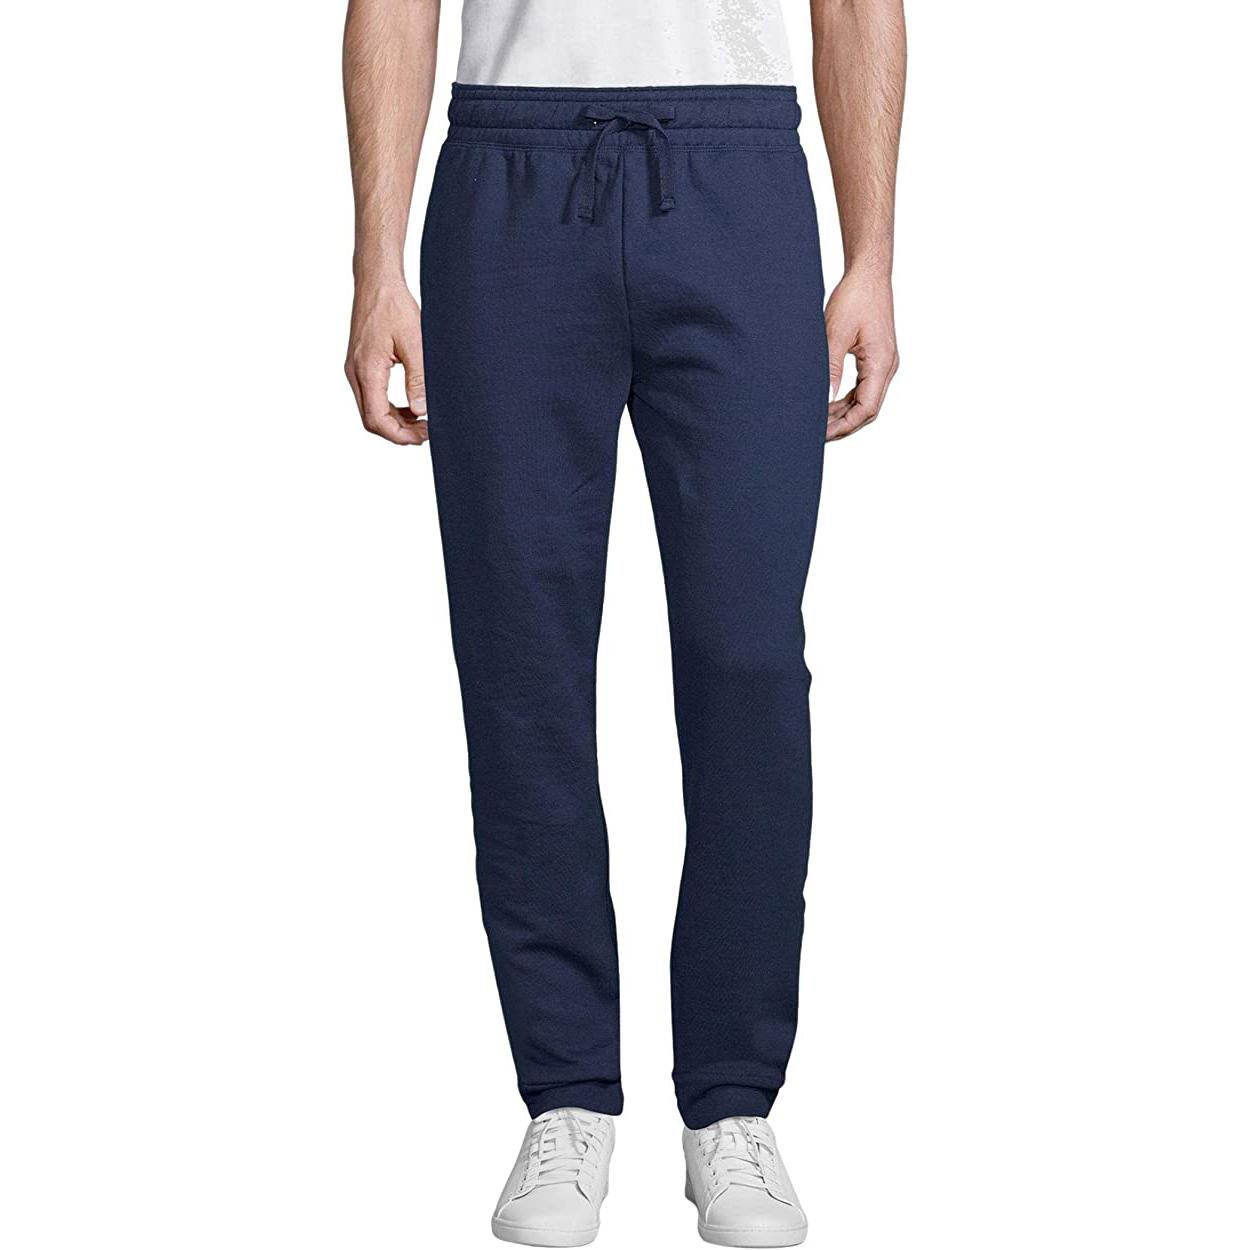 Hanes Mens EcoSmart Jogger Sweatpants with Pockets for $9